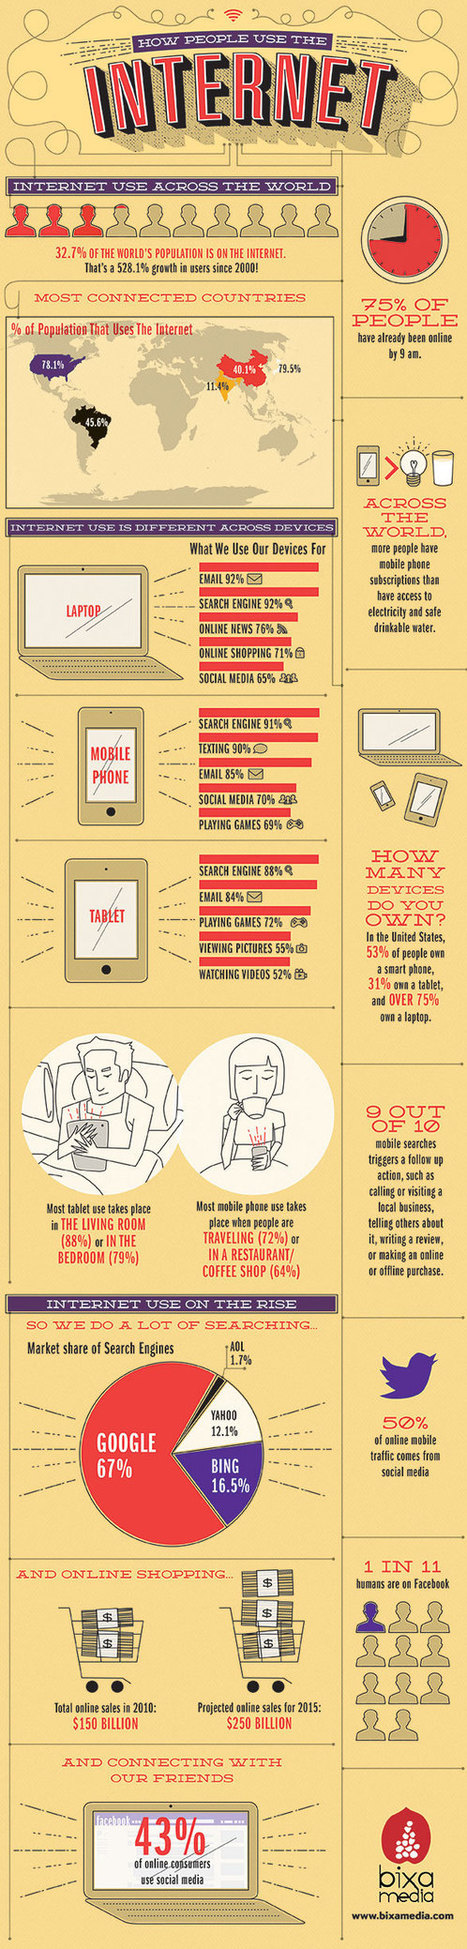 How People Use the Internet [INFOGRAPHIC] | Information Technology & Social Media News | Scoop.it